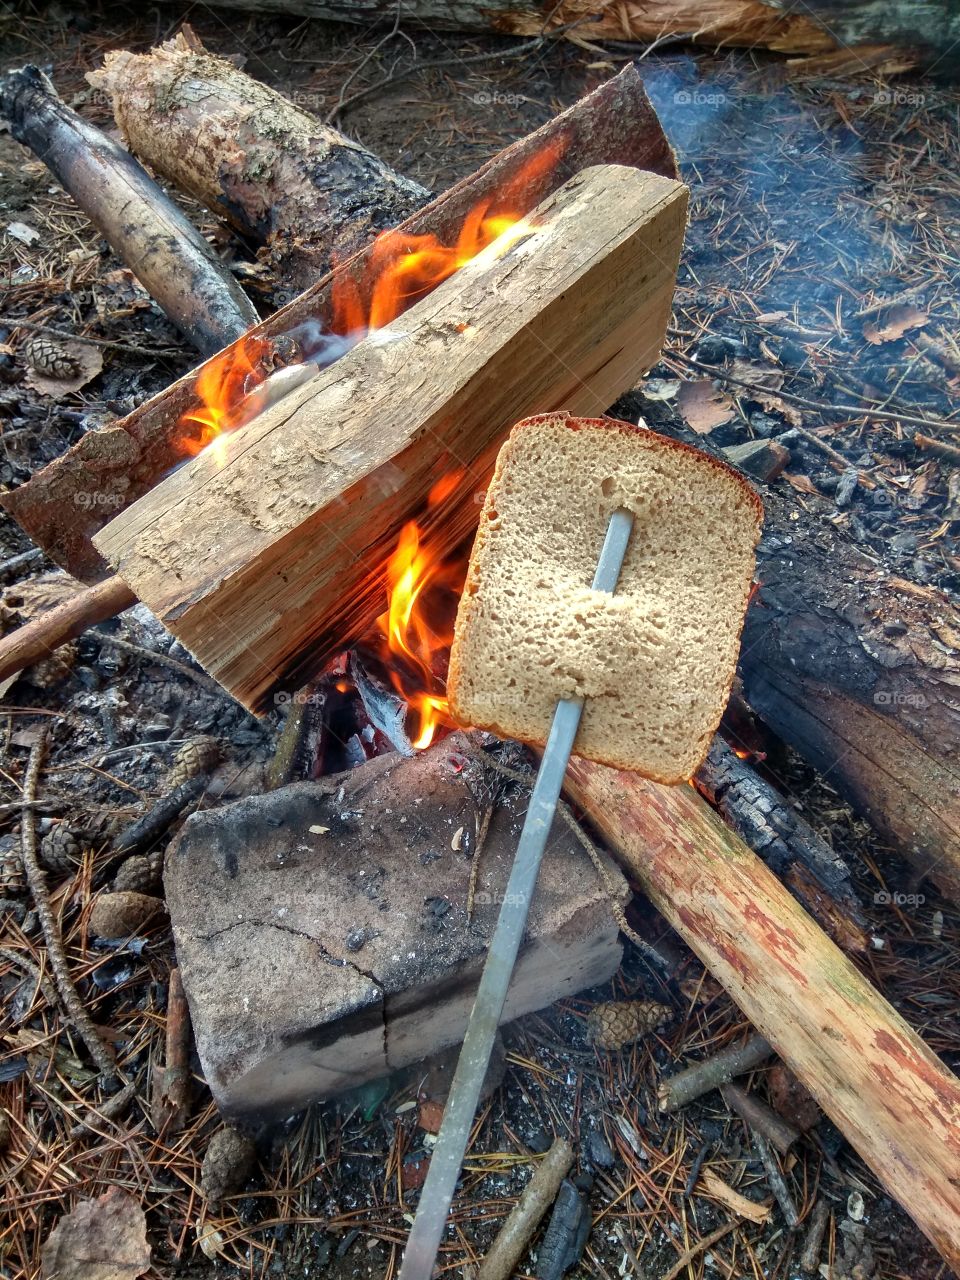 Toasted bread with burnfire